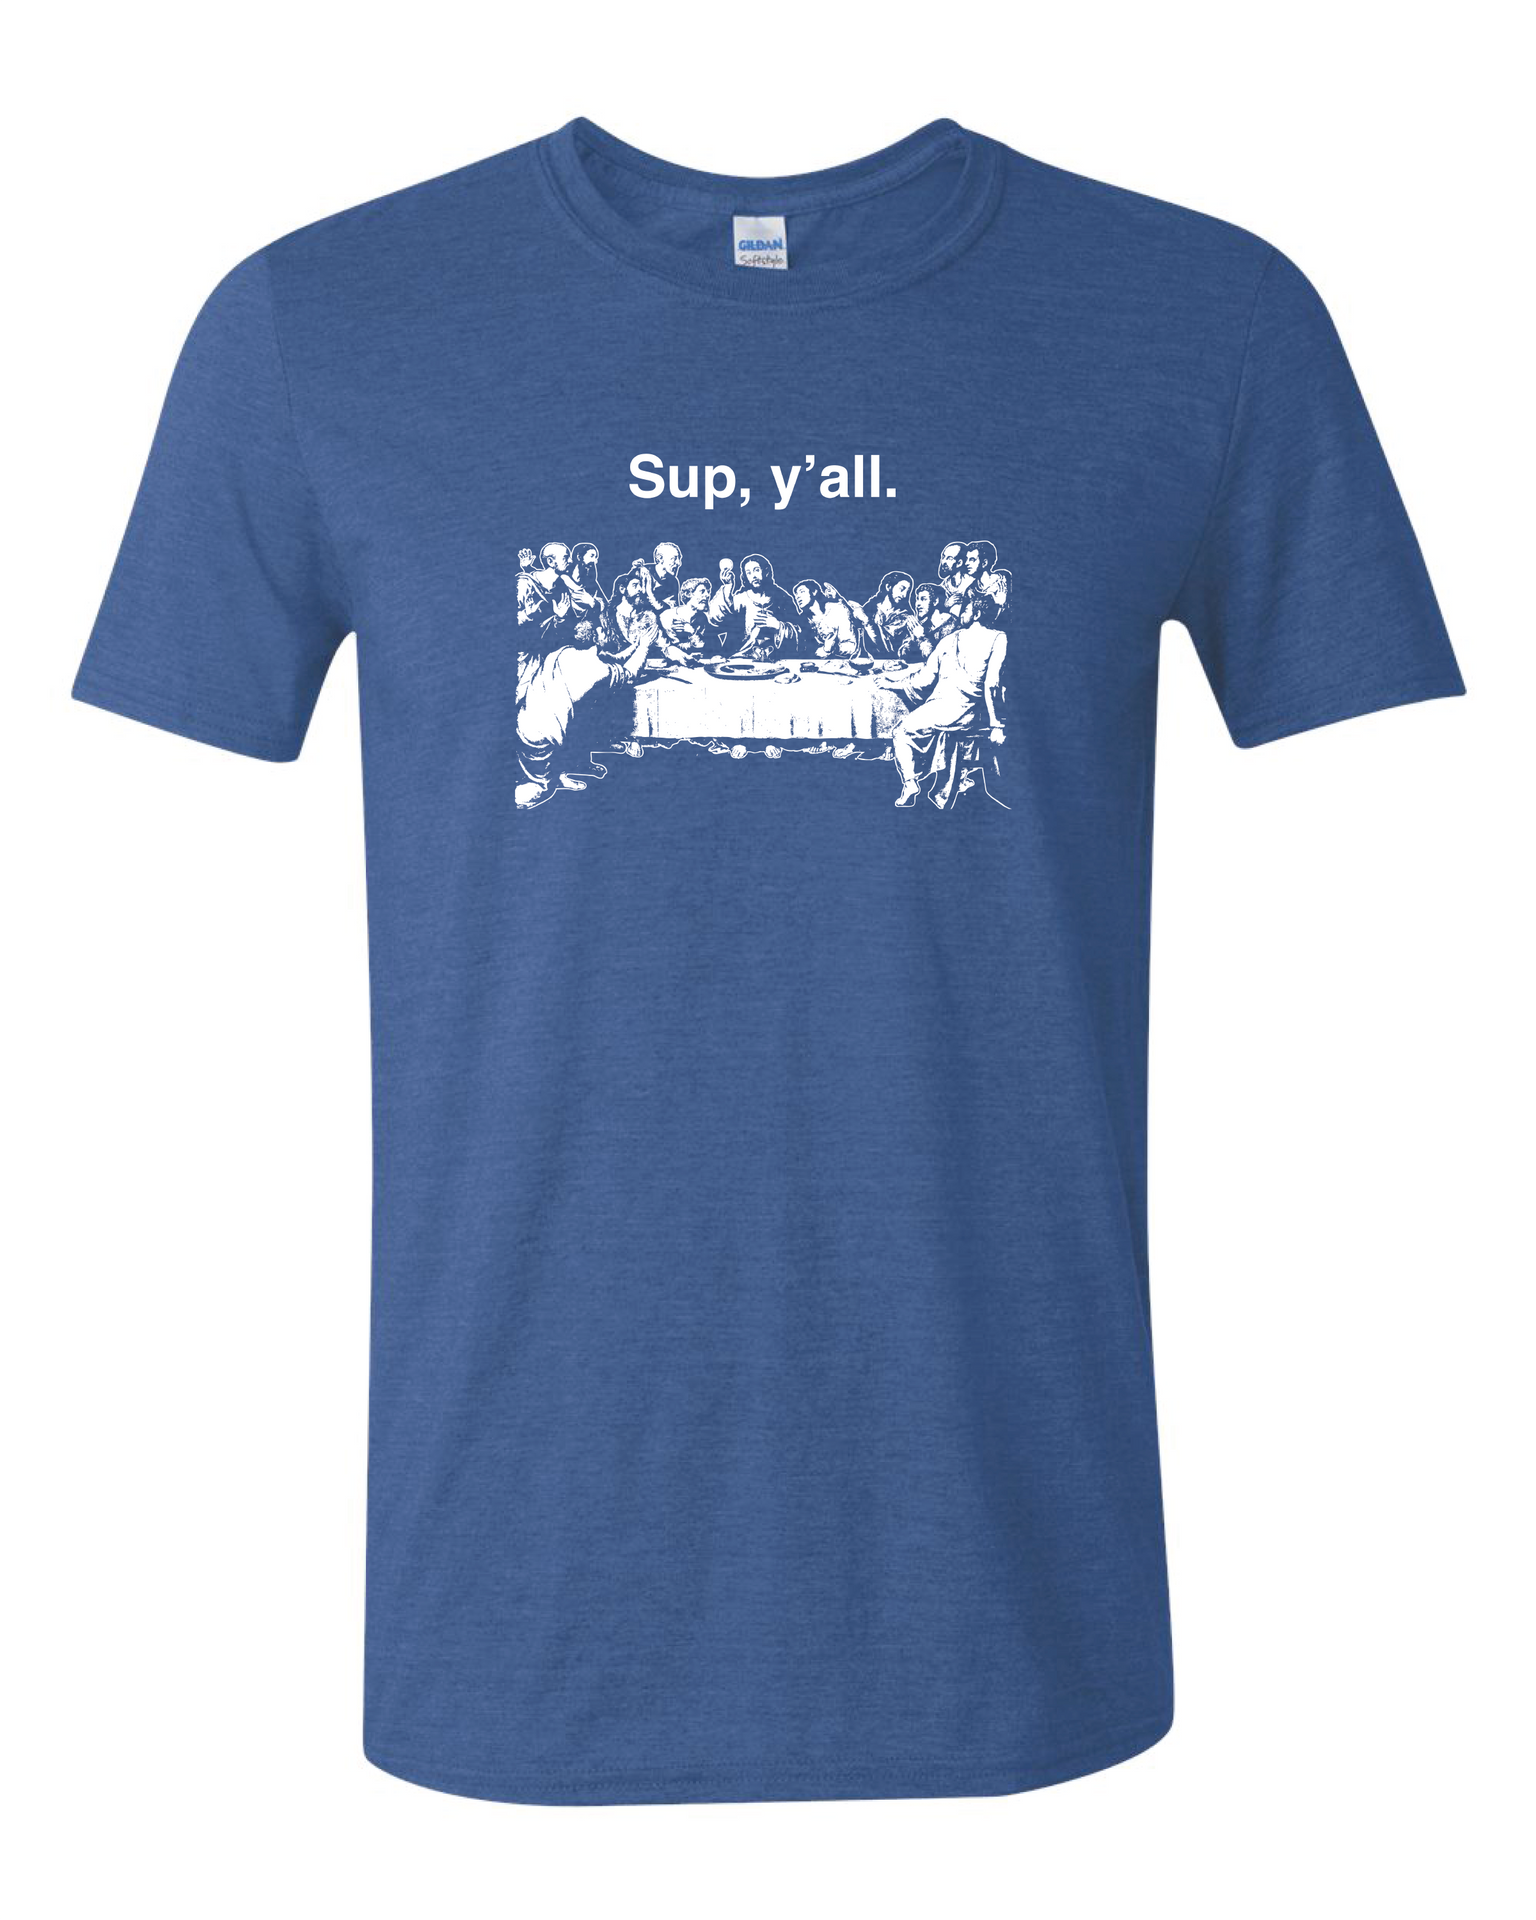 Sup y'all - Last Supper T Shirt